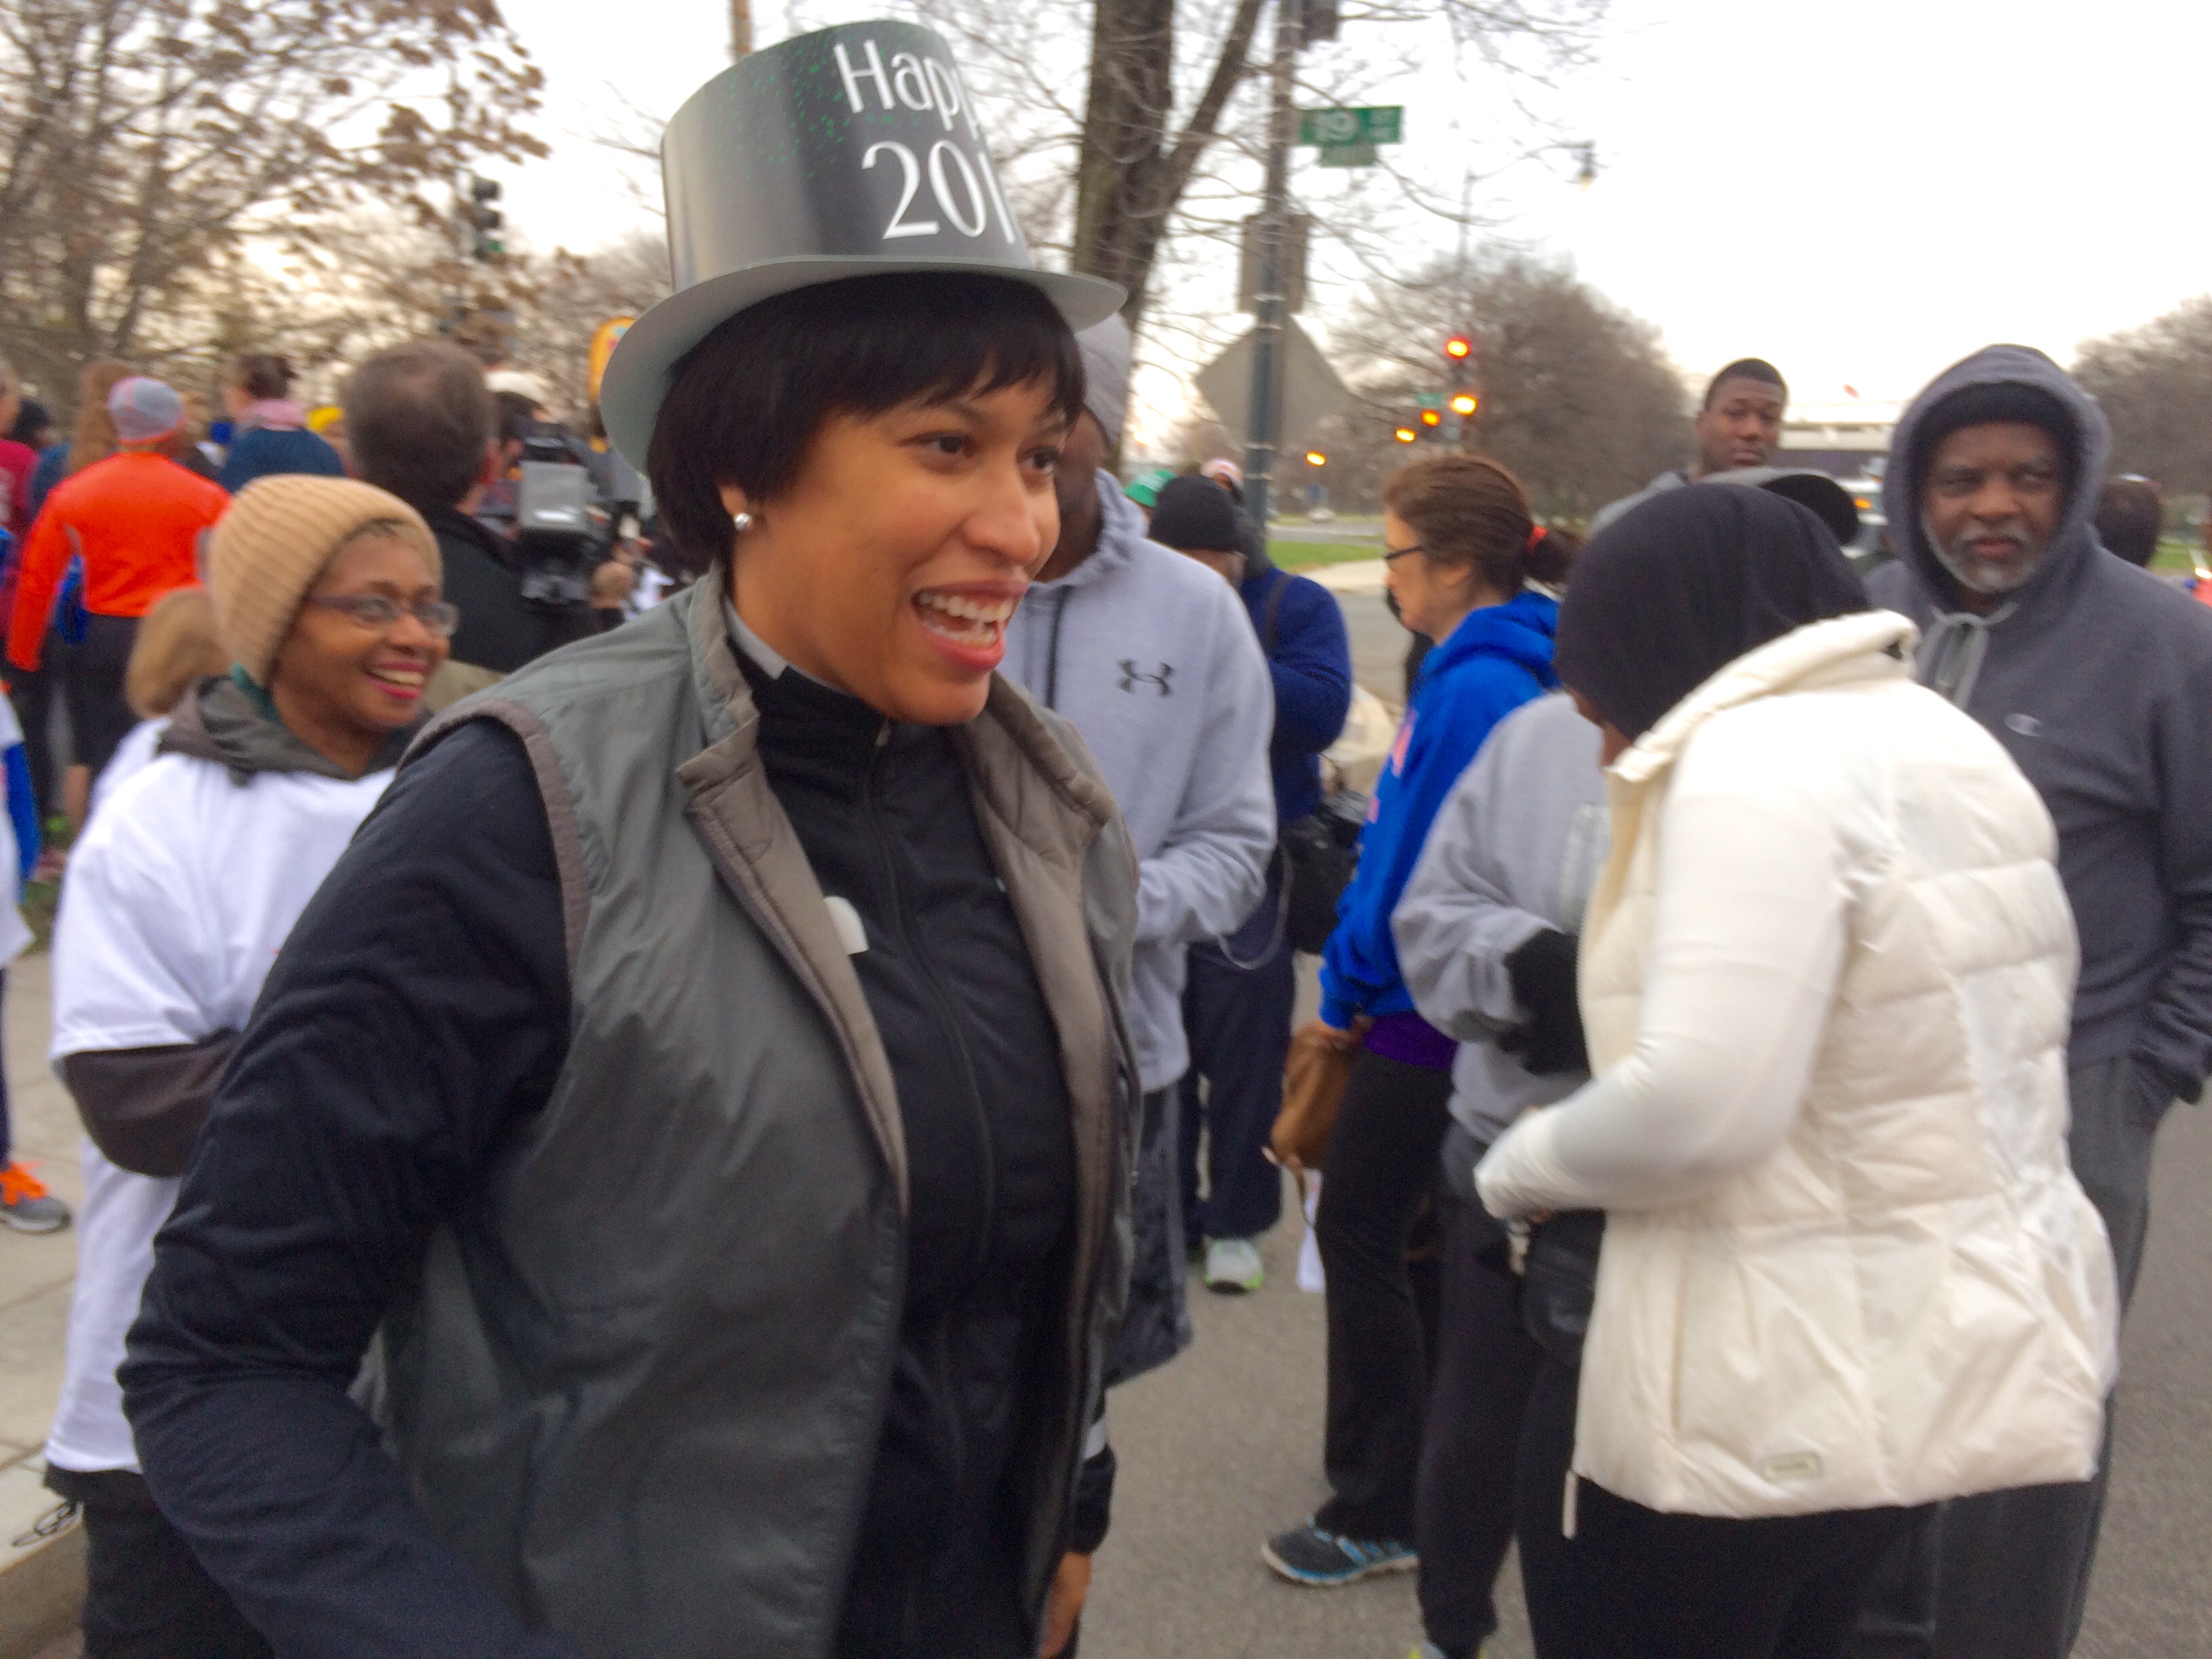 Mayor Bowser calls for a focus on health in the new year at 5K run